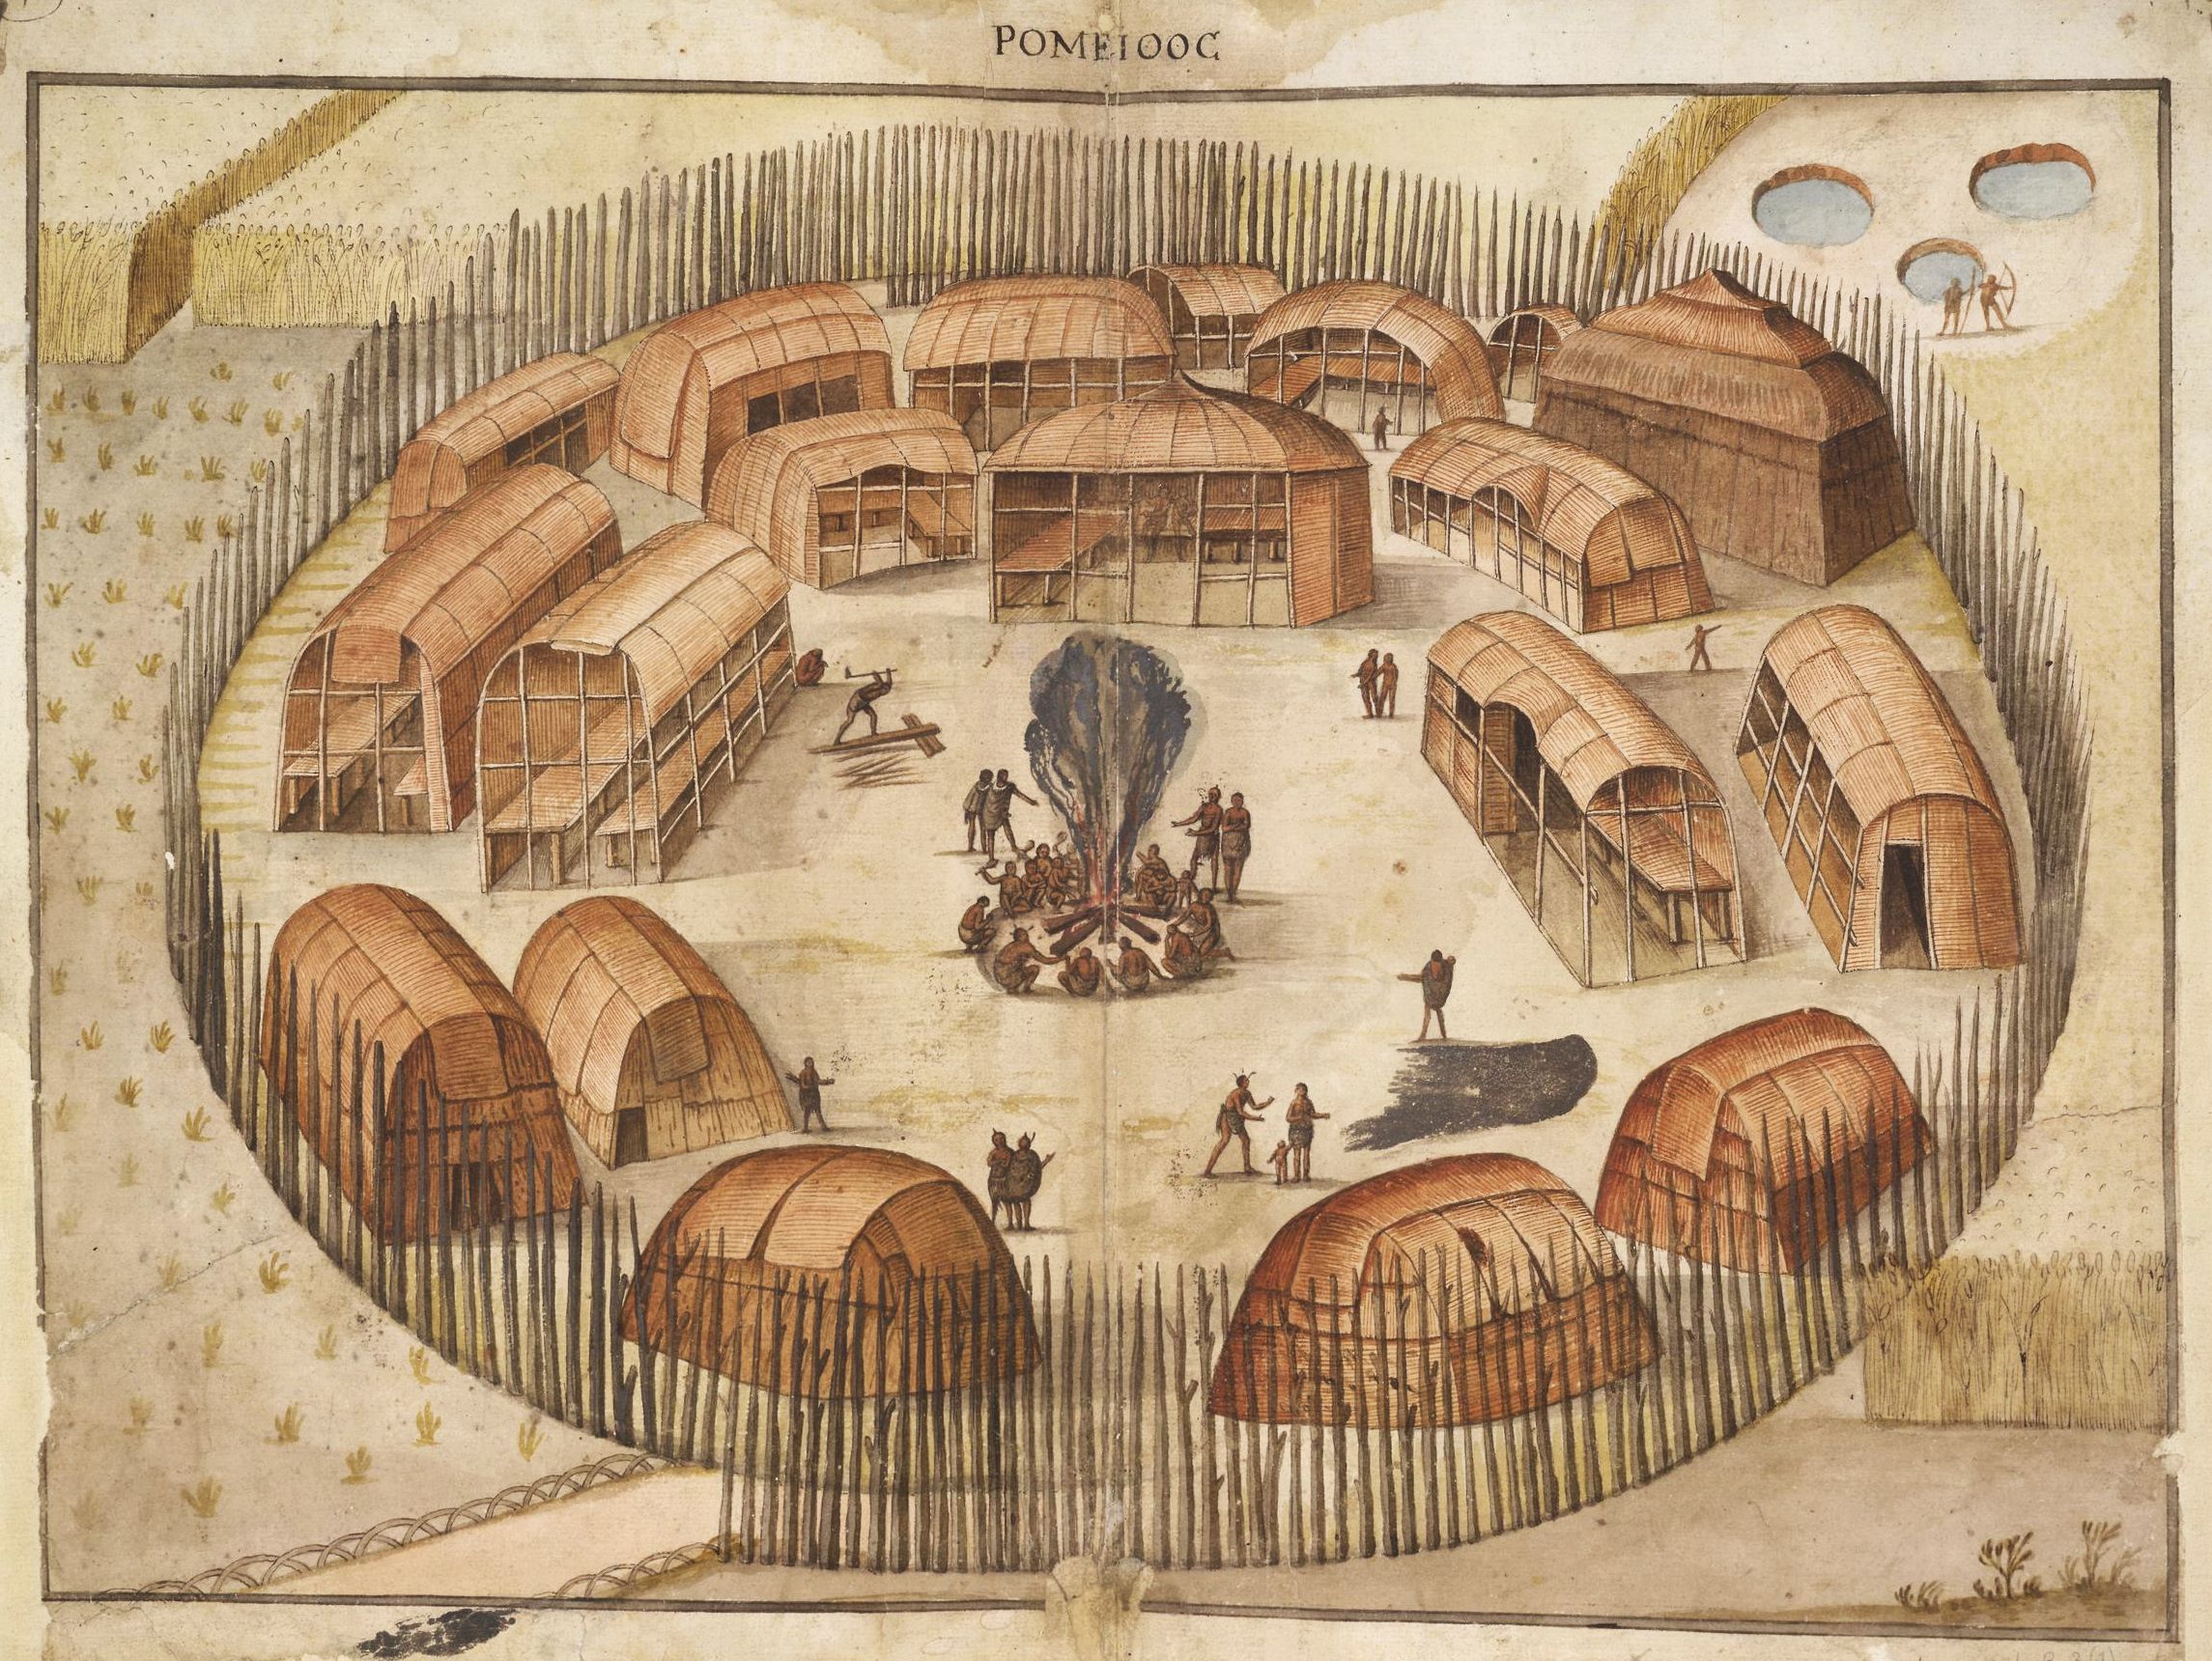 John White's watercolor drawing of the Secotan village of Pomeiooc showshe village of Pomeiooc shows figures around a camp fire, with huts and fencing encircling the village. British Museum.